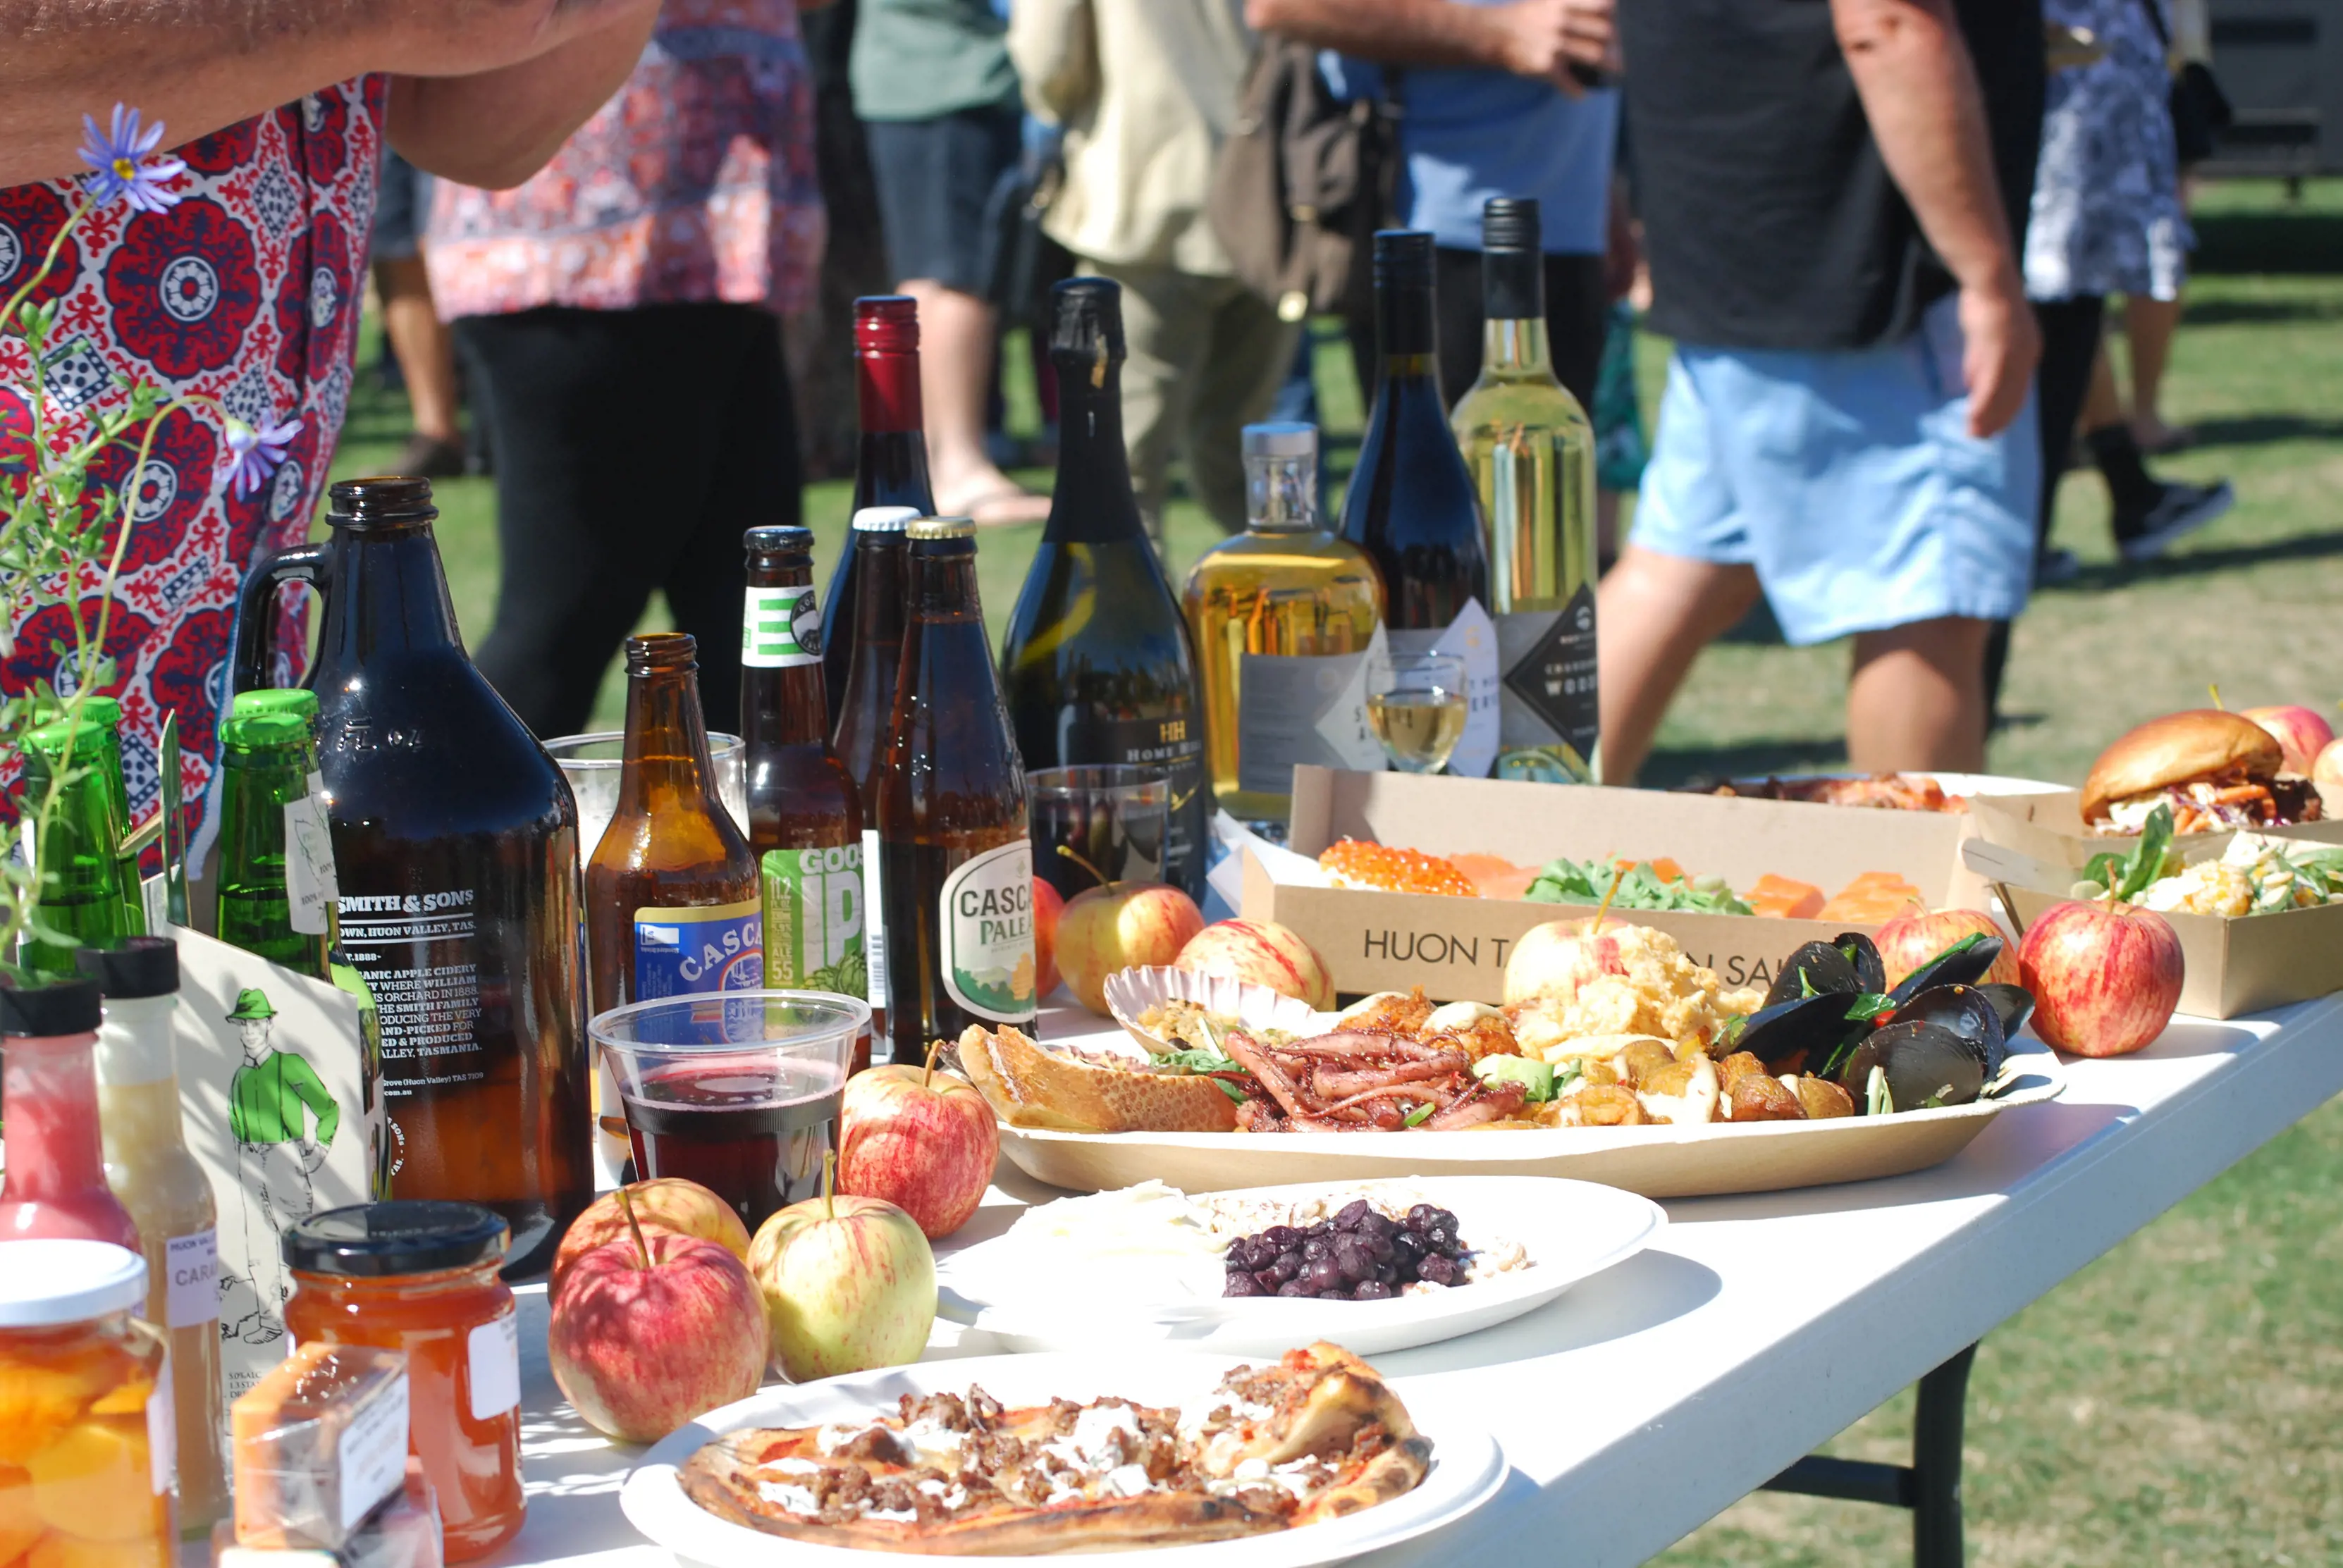 Delicious close up image of food and wine on a table at the A Taste of the Huon Festival.